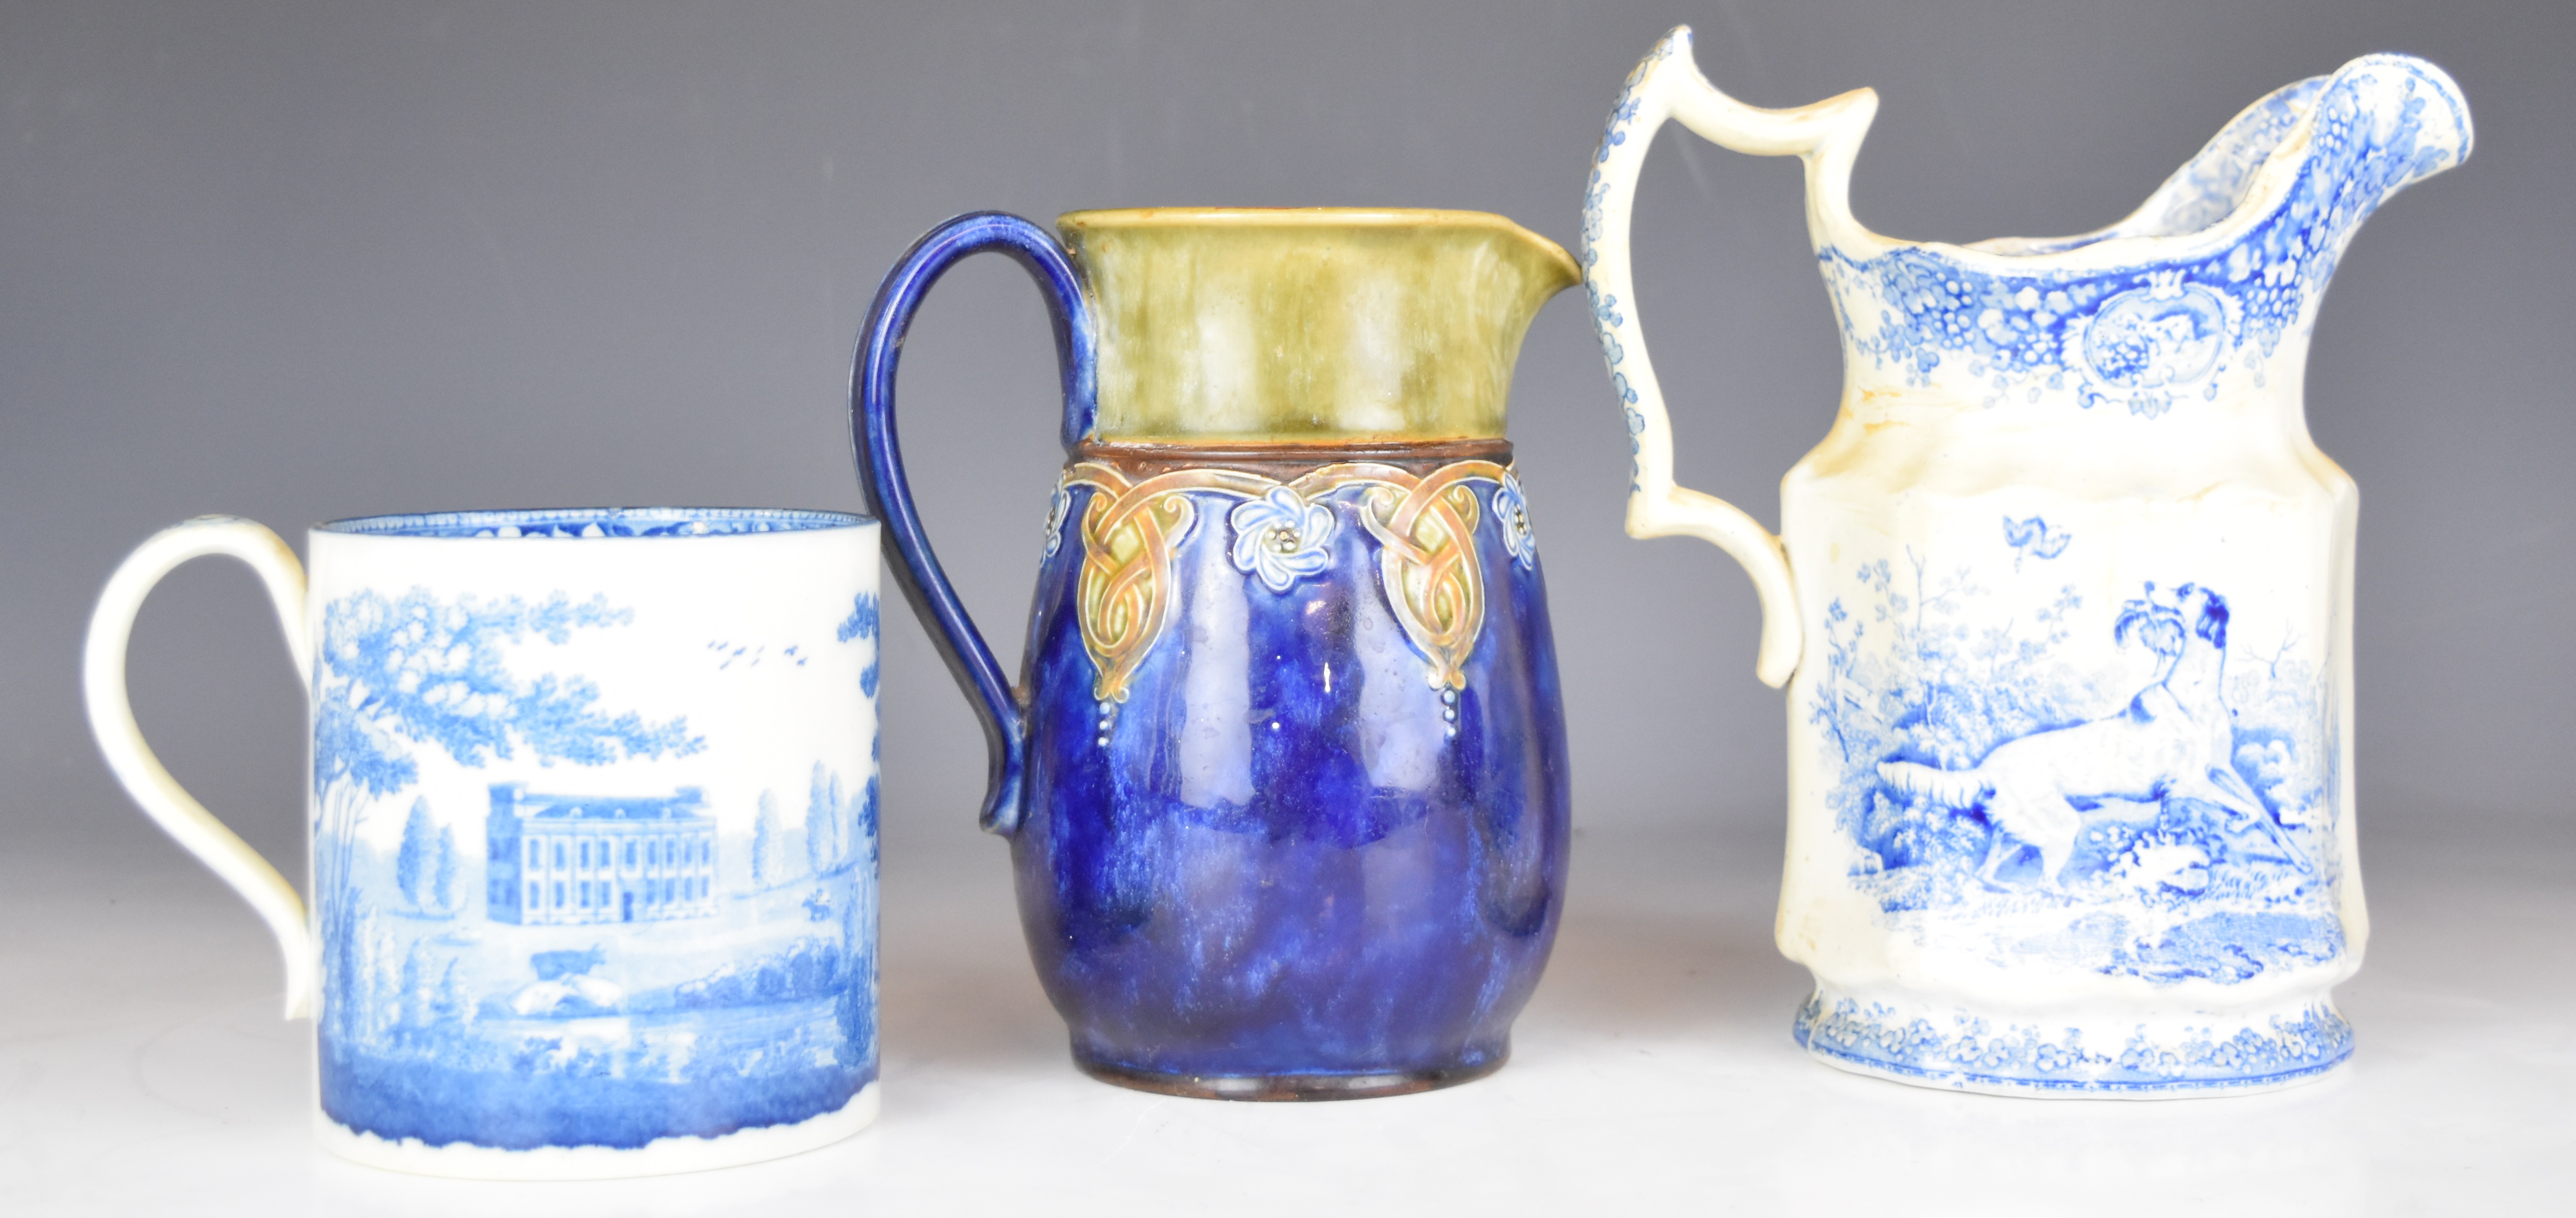 19thC blue and white transfer printed ware including a sifter, large tankard, jug with sporting - Image 6 of 8